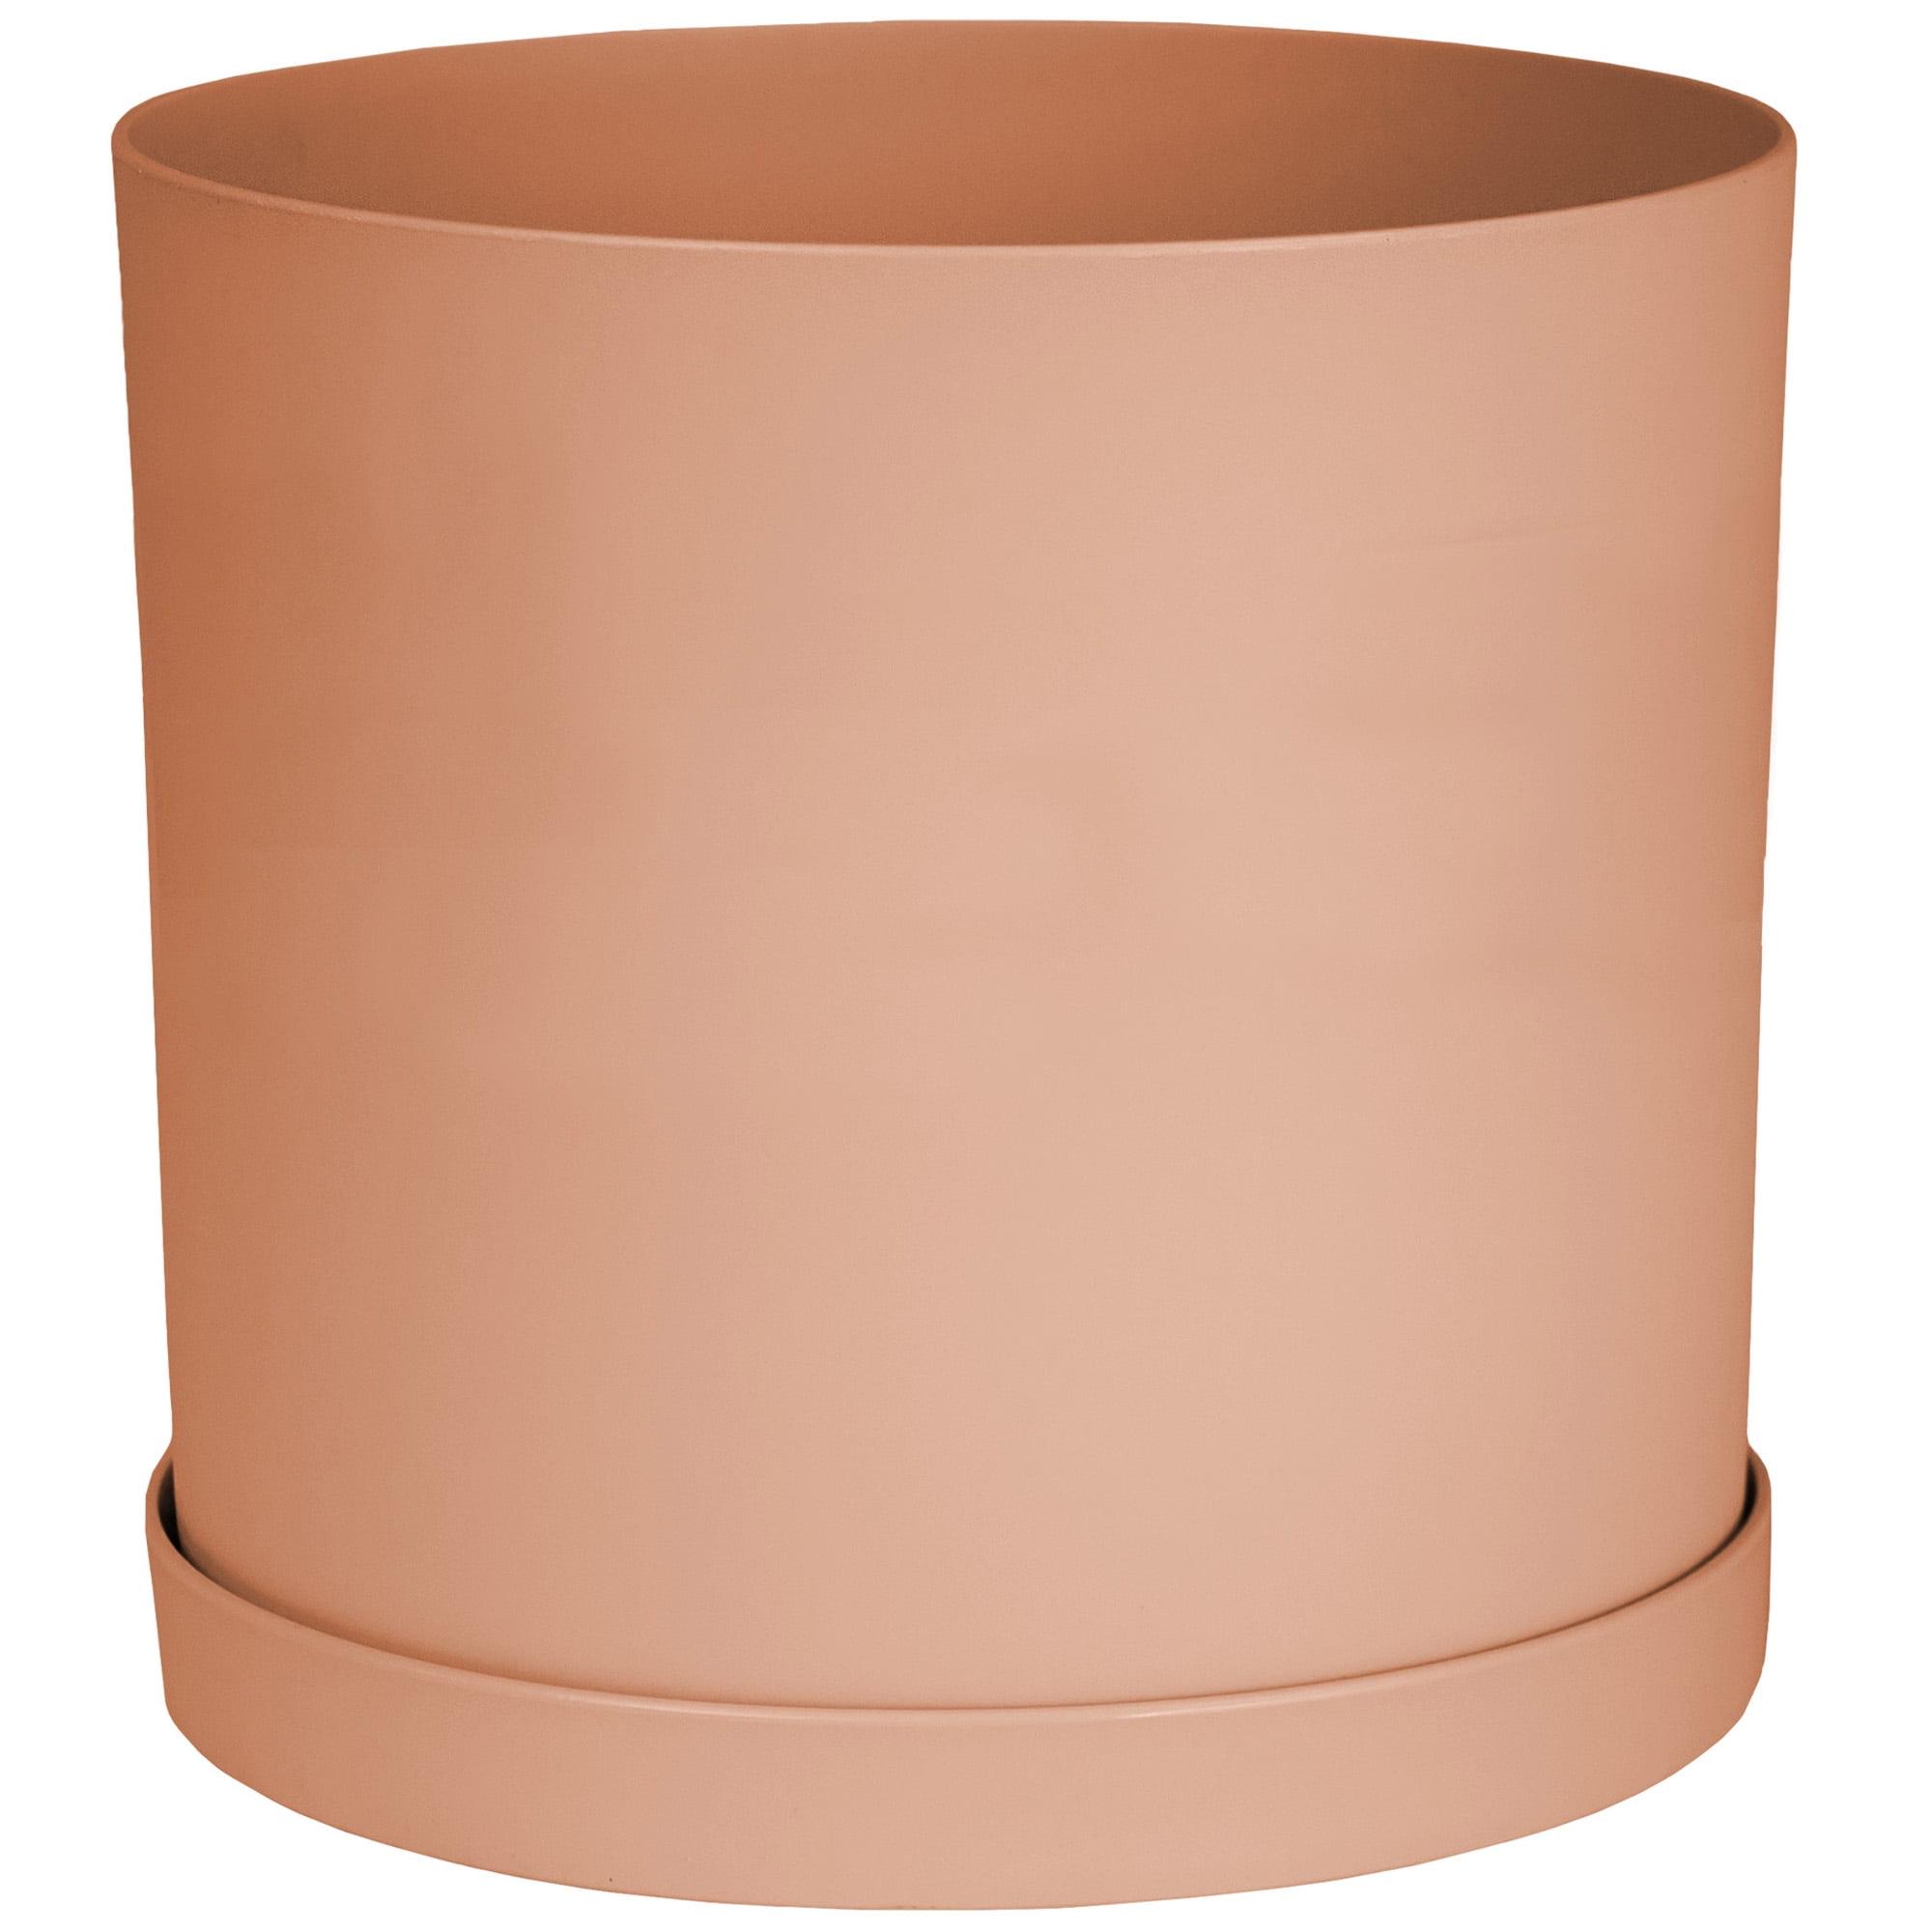 Contemporary Muted Terra Cotta Round Resin Planter with Saucer, 9.5"